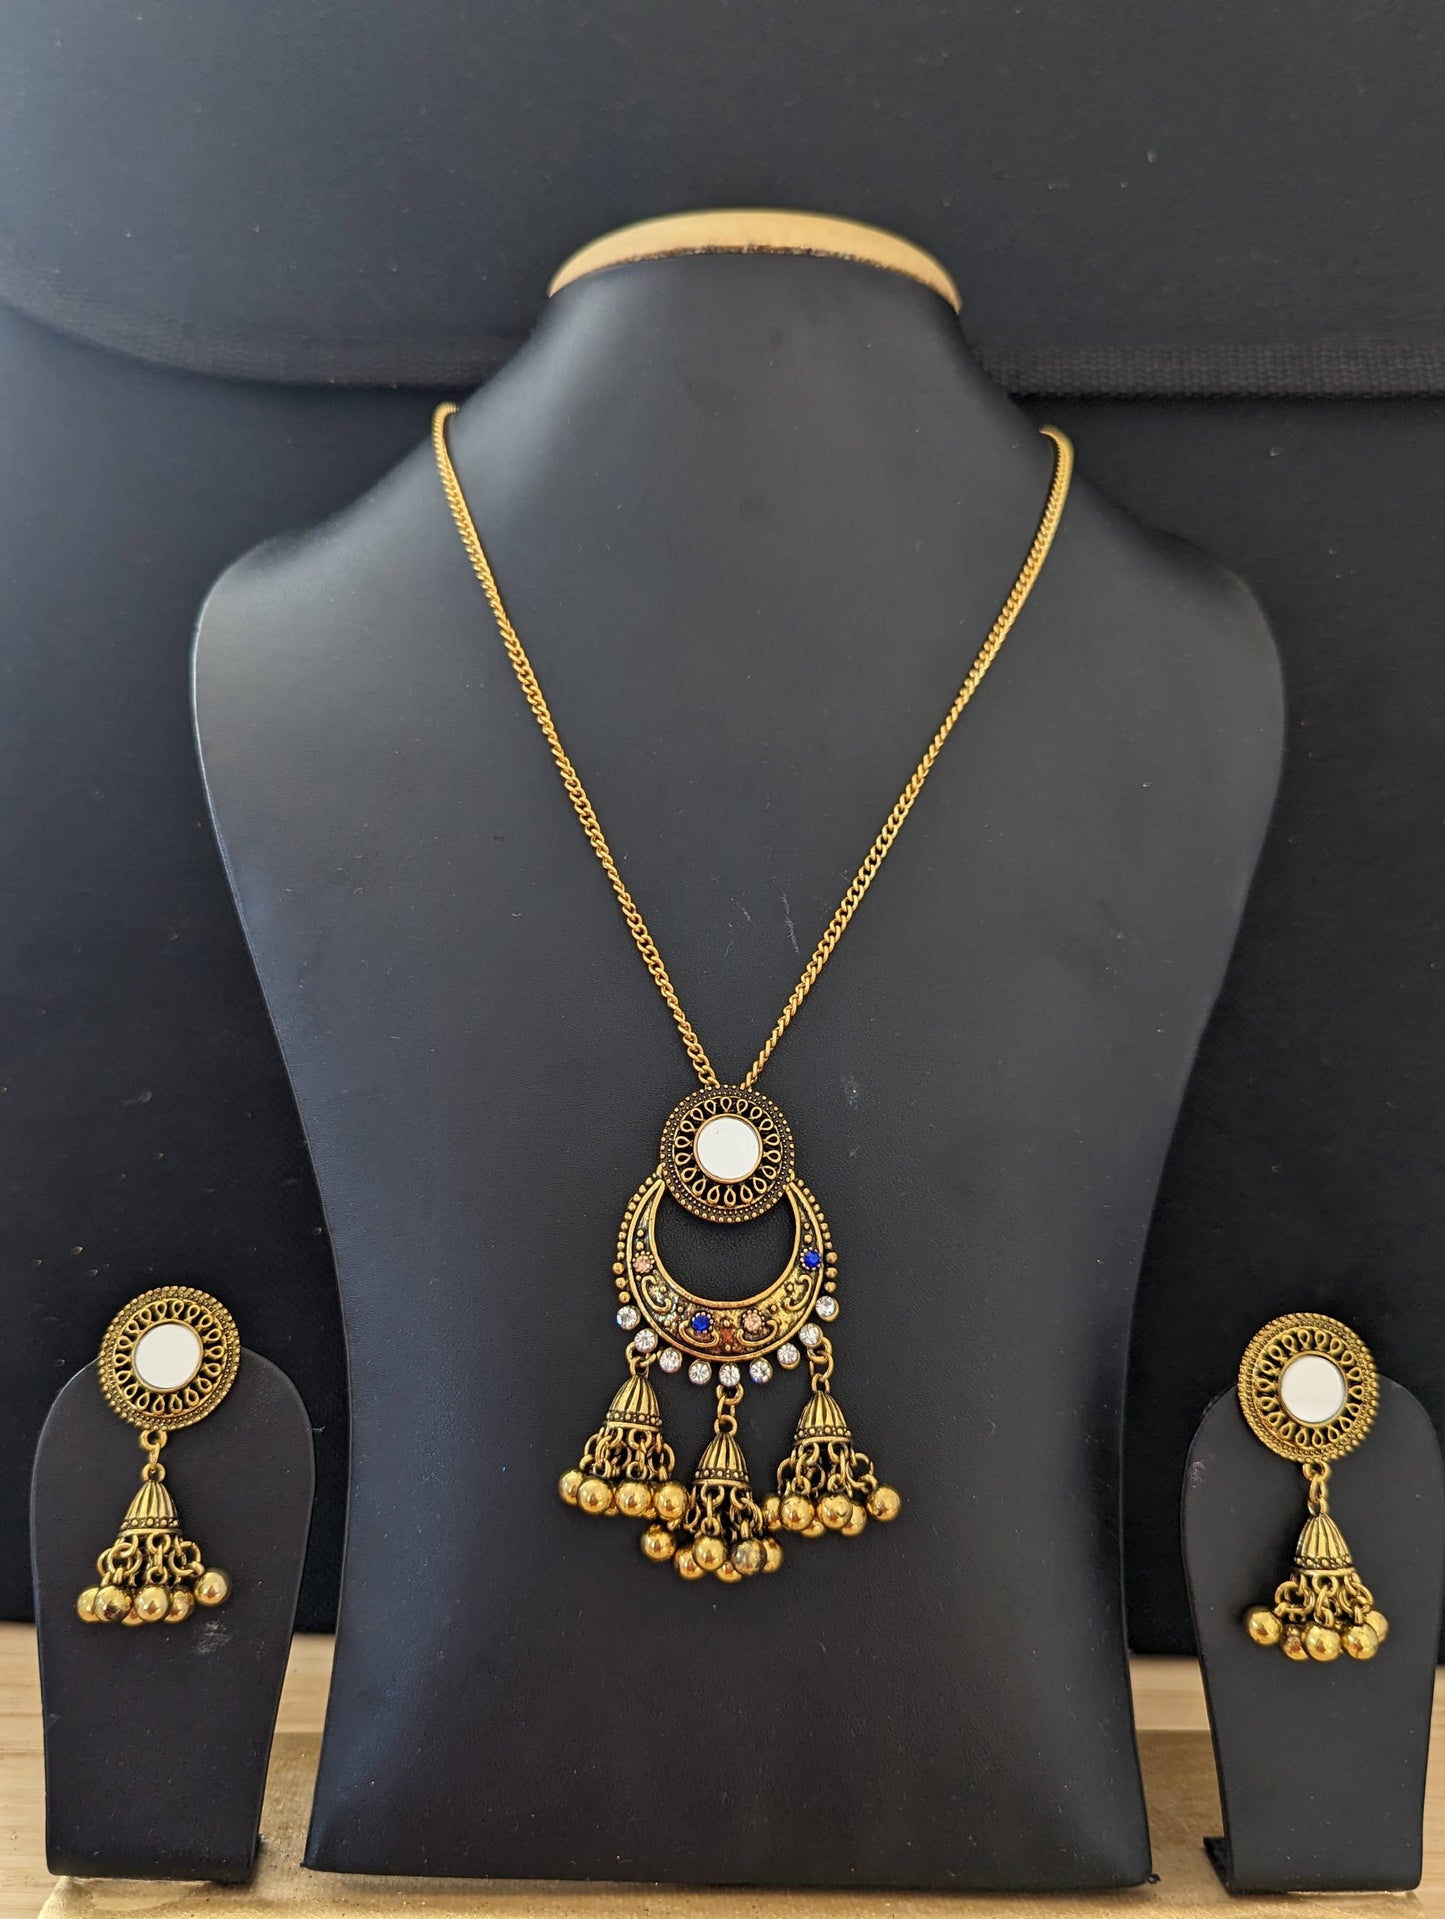 Antique gold mirror pendant chain necklace and earring set - Design 6